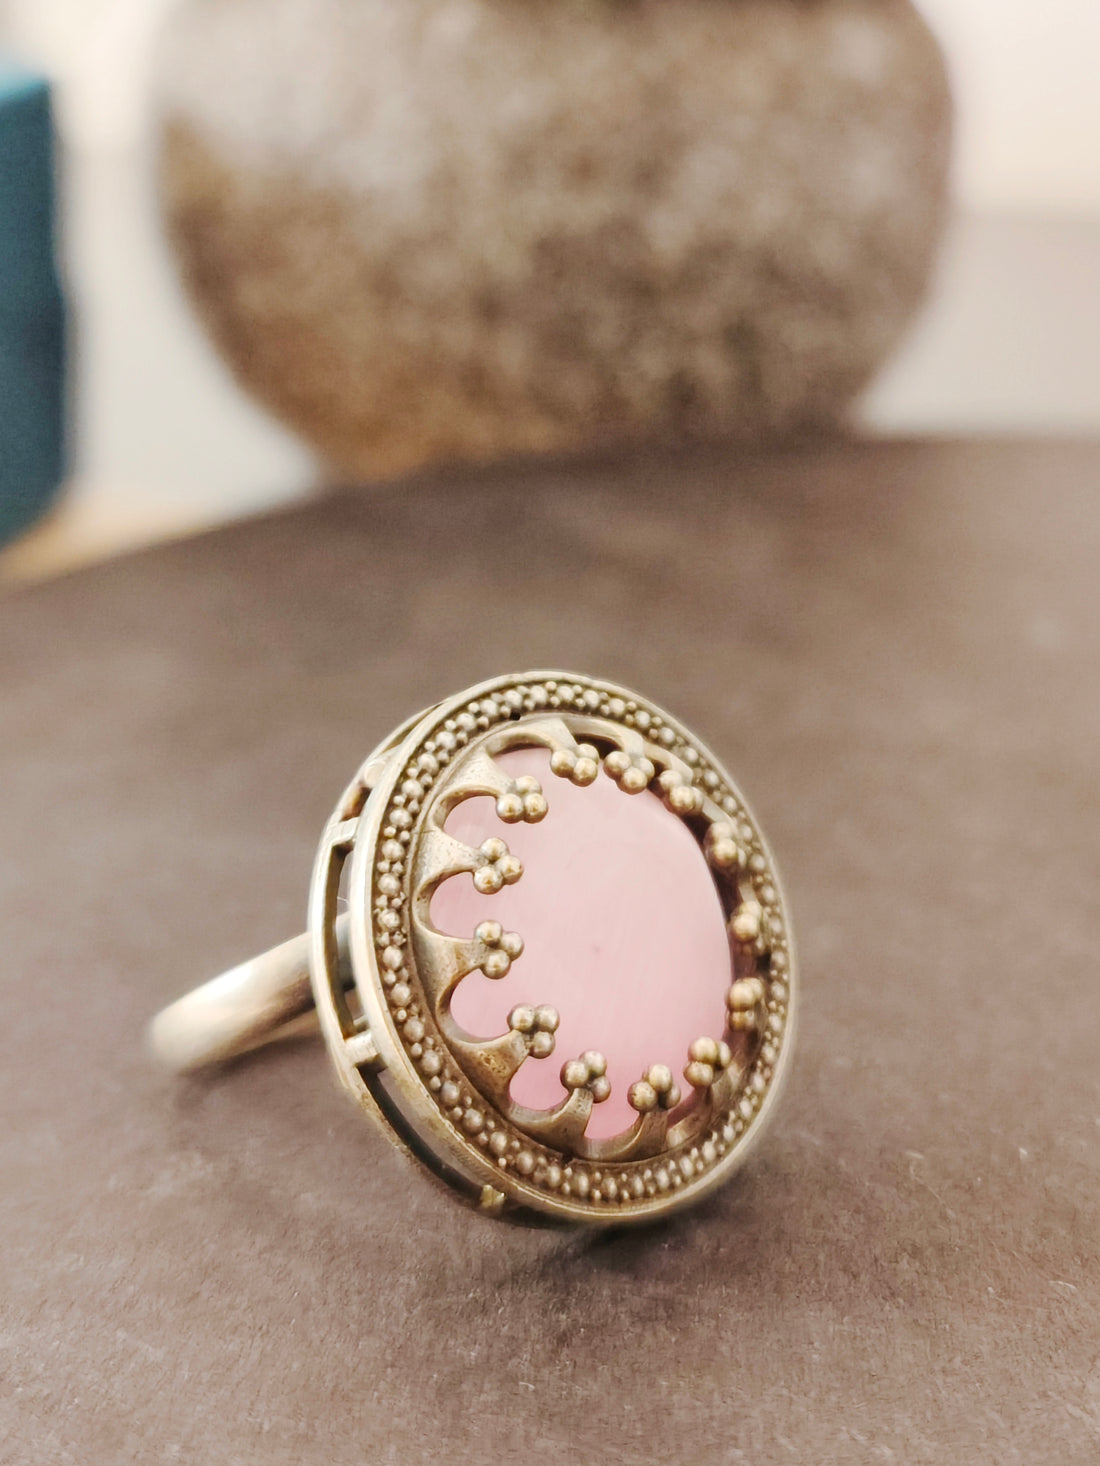 Aganya Multi Color Adjustable Rings with Antique Finish and Big Stone | Festive Occasions | for Traditional Look | for Office Indian Look-Pink - Mrigaya India